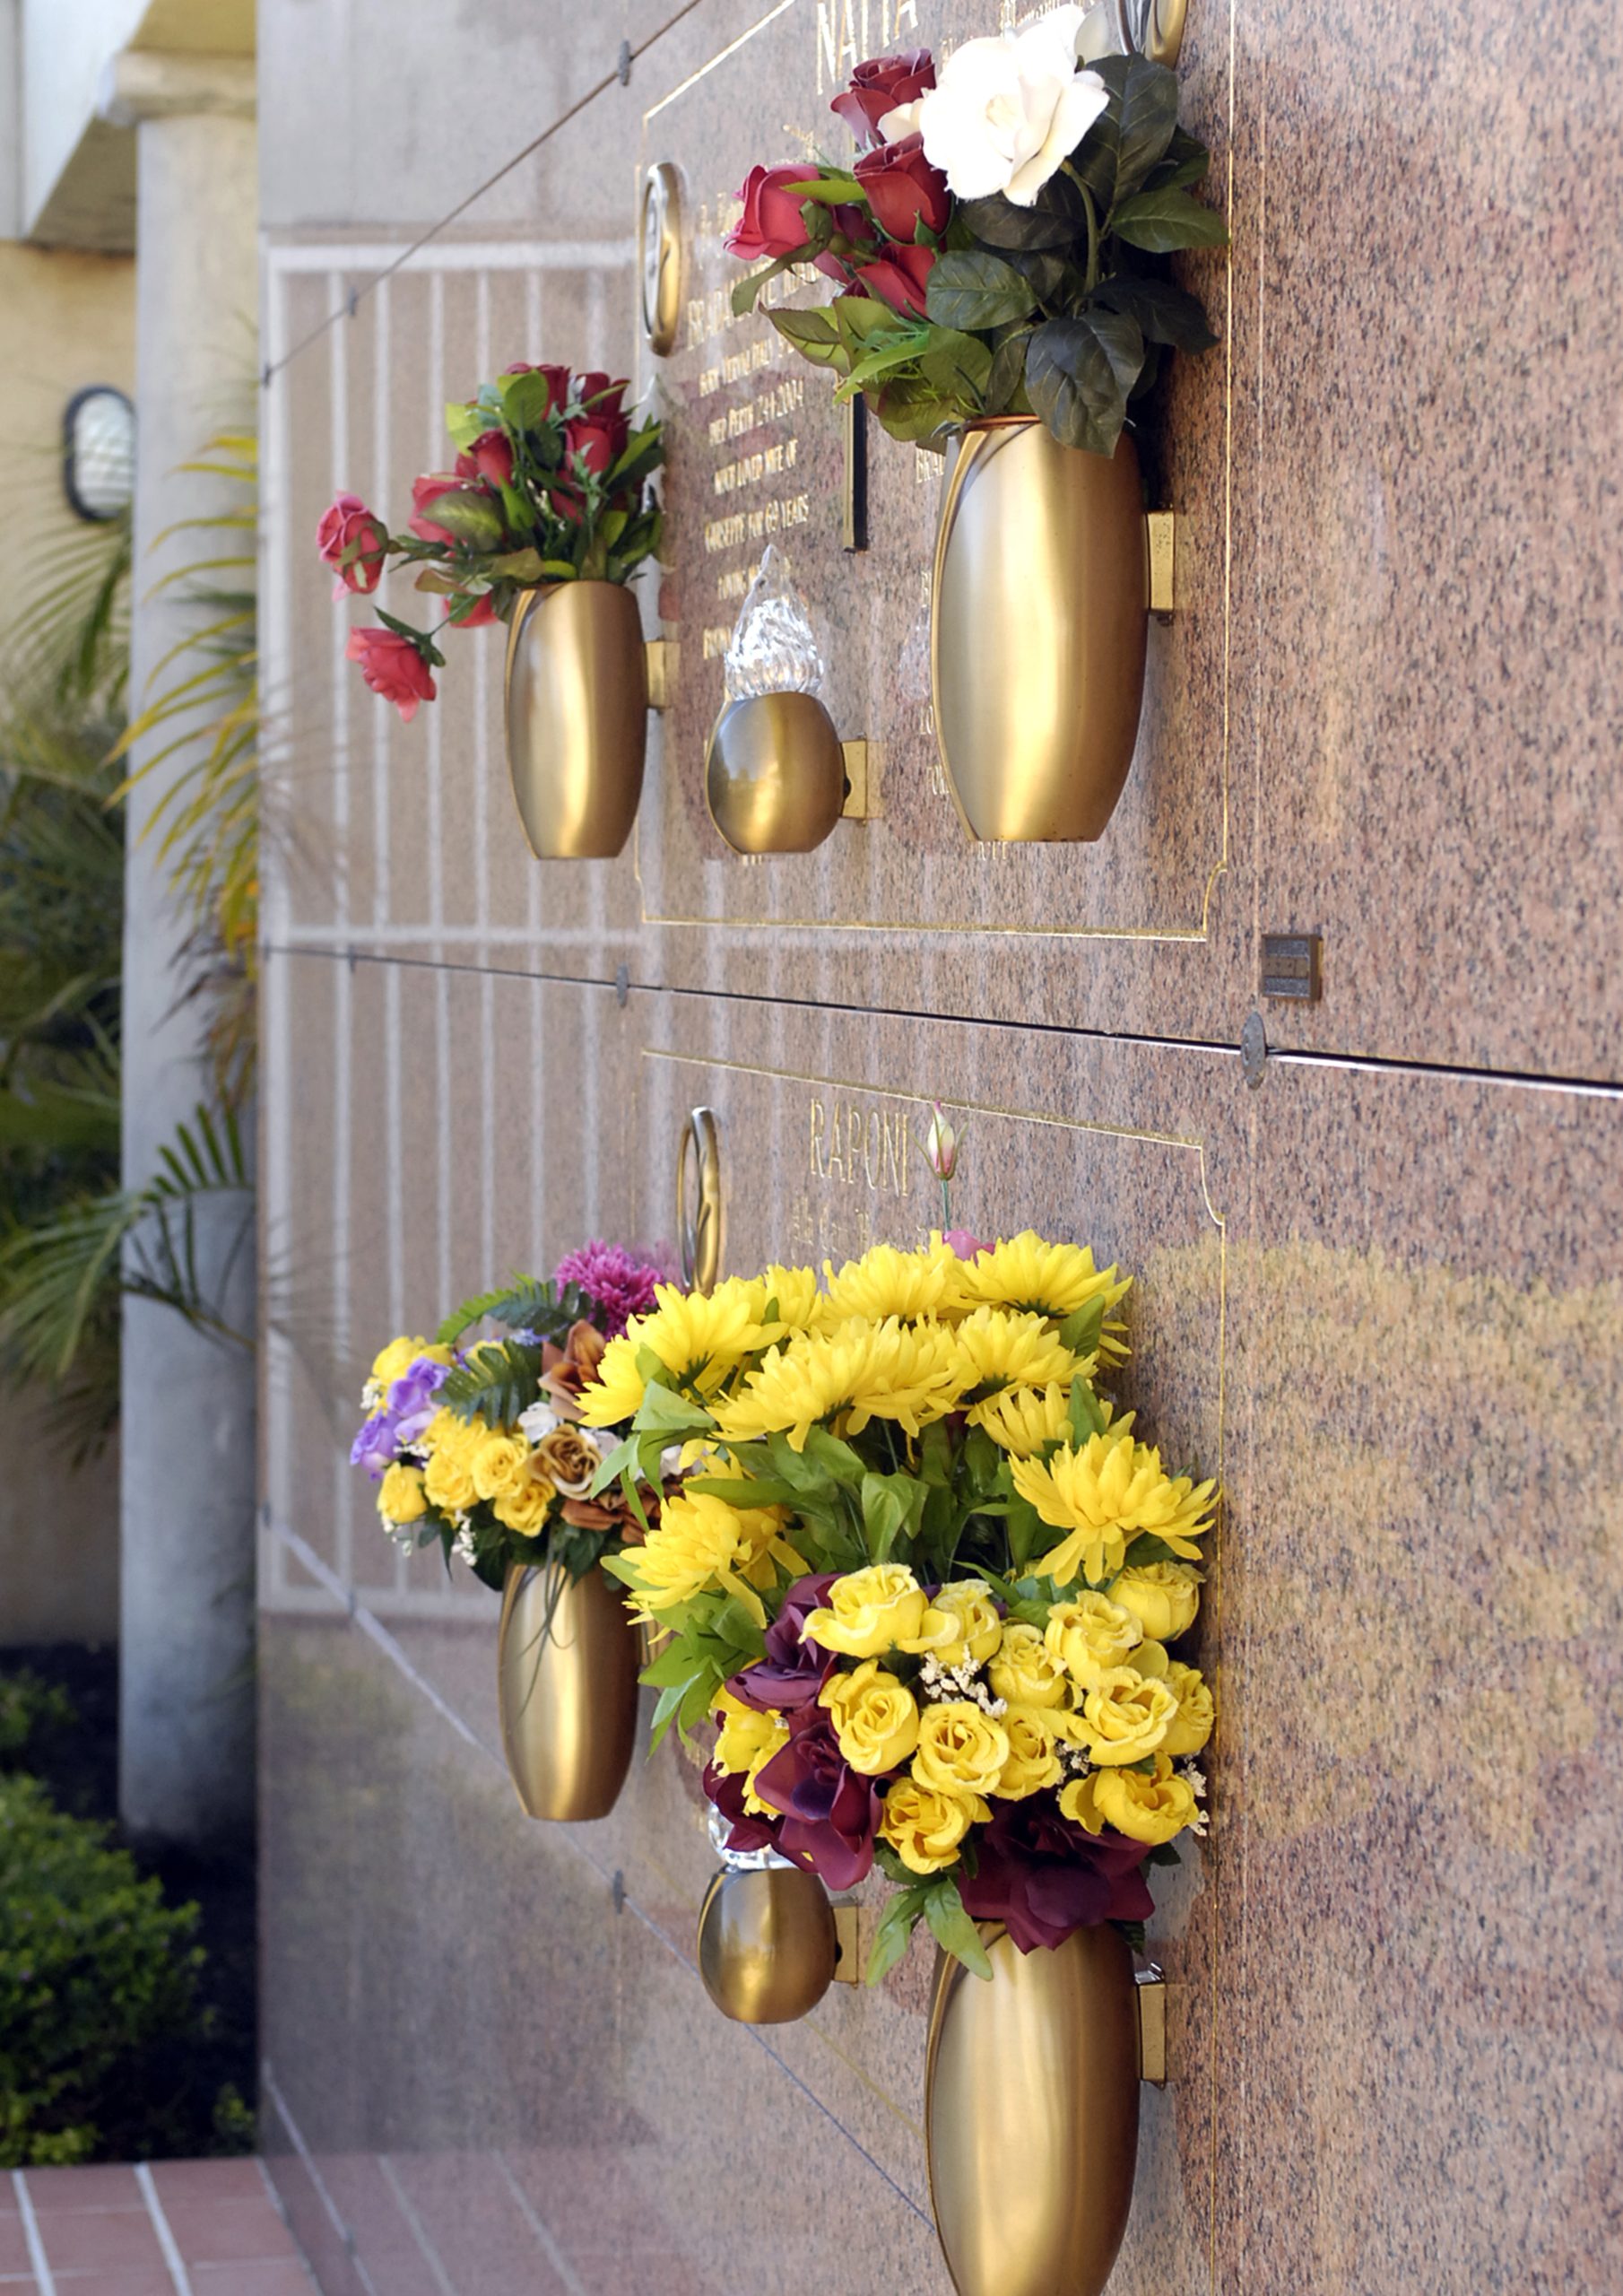 Guildford Cemetery Garden crypts with floral tributes